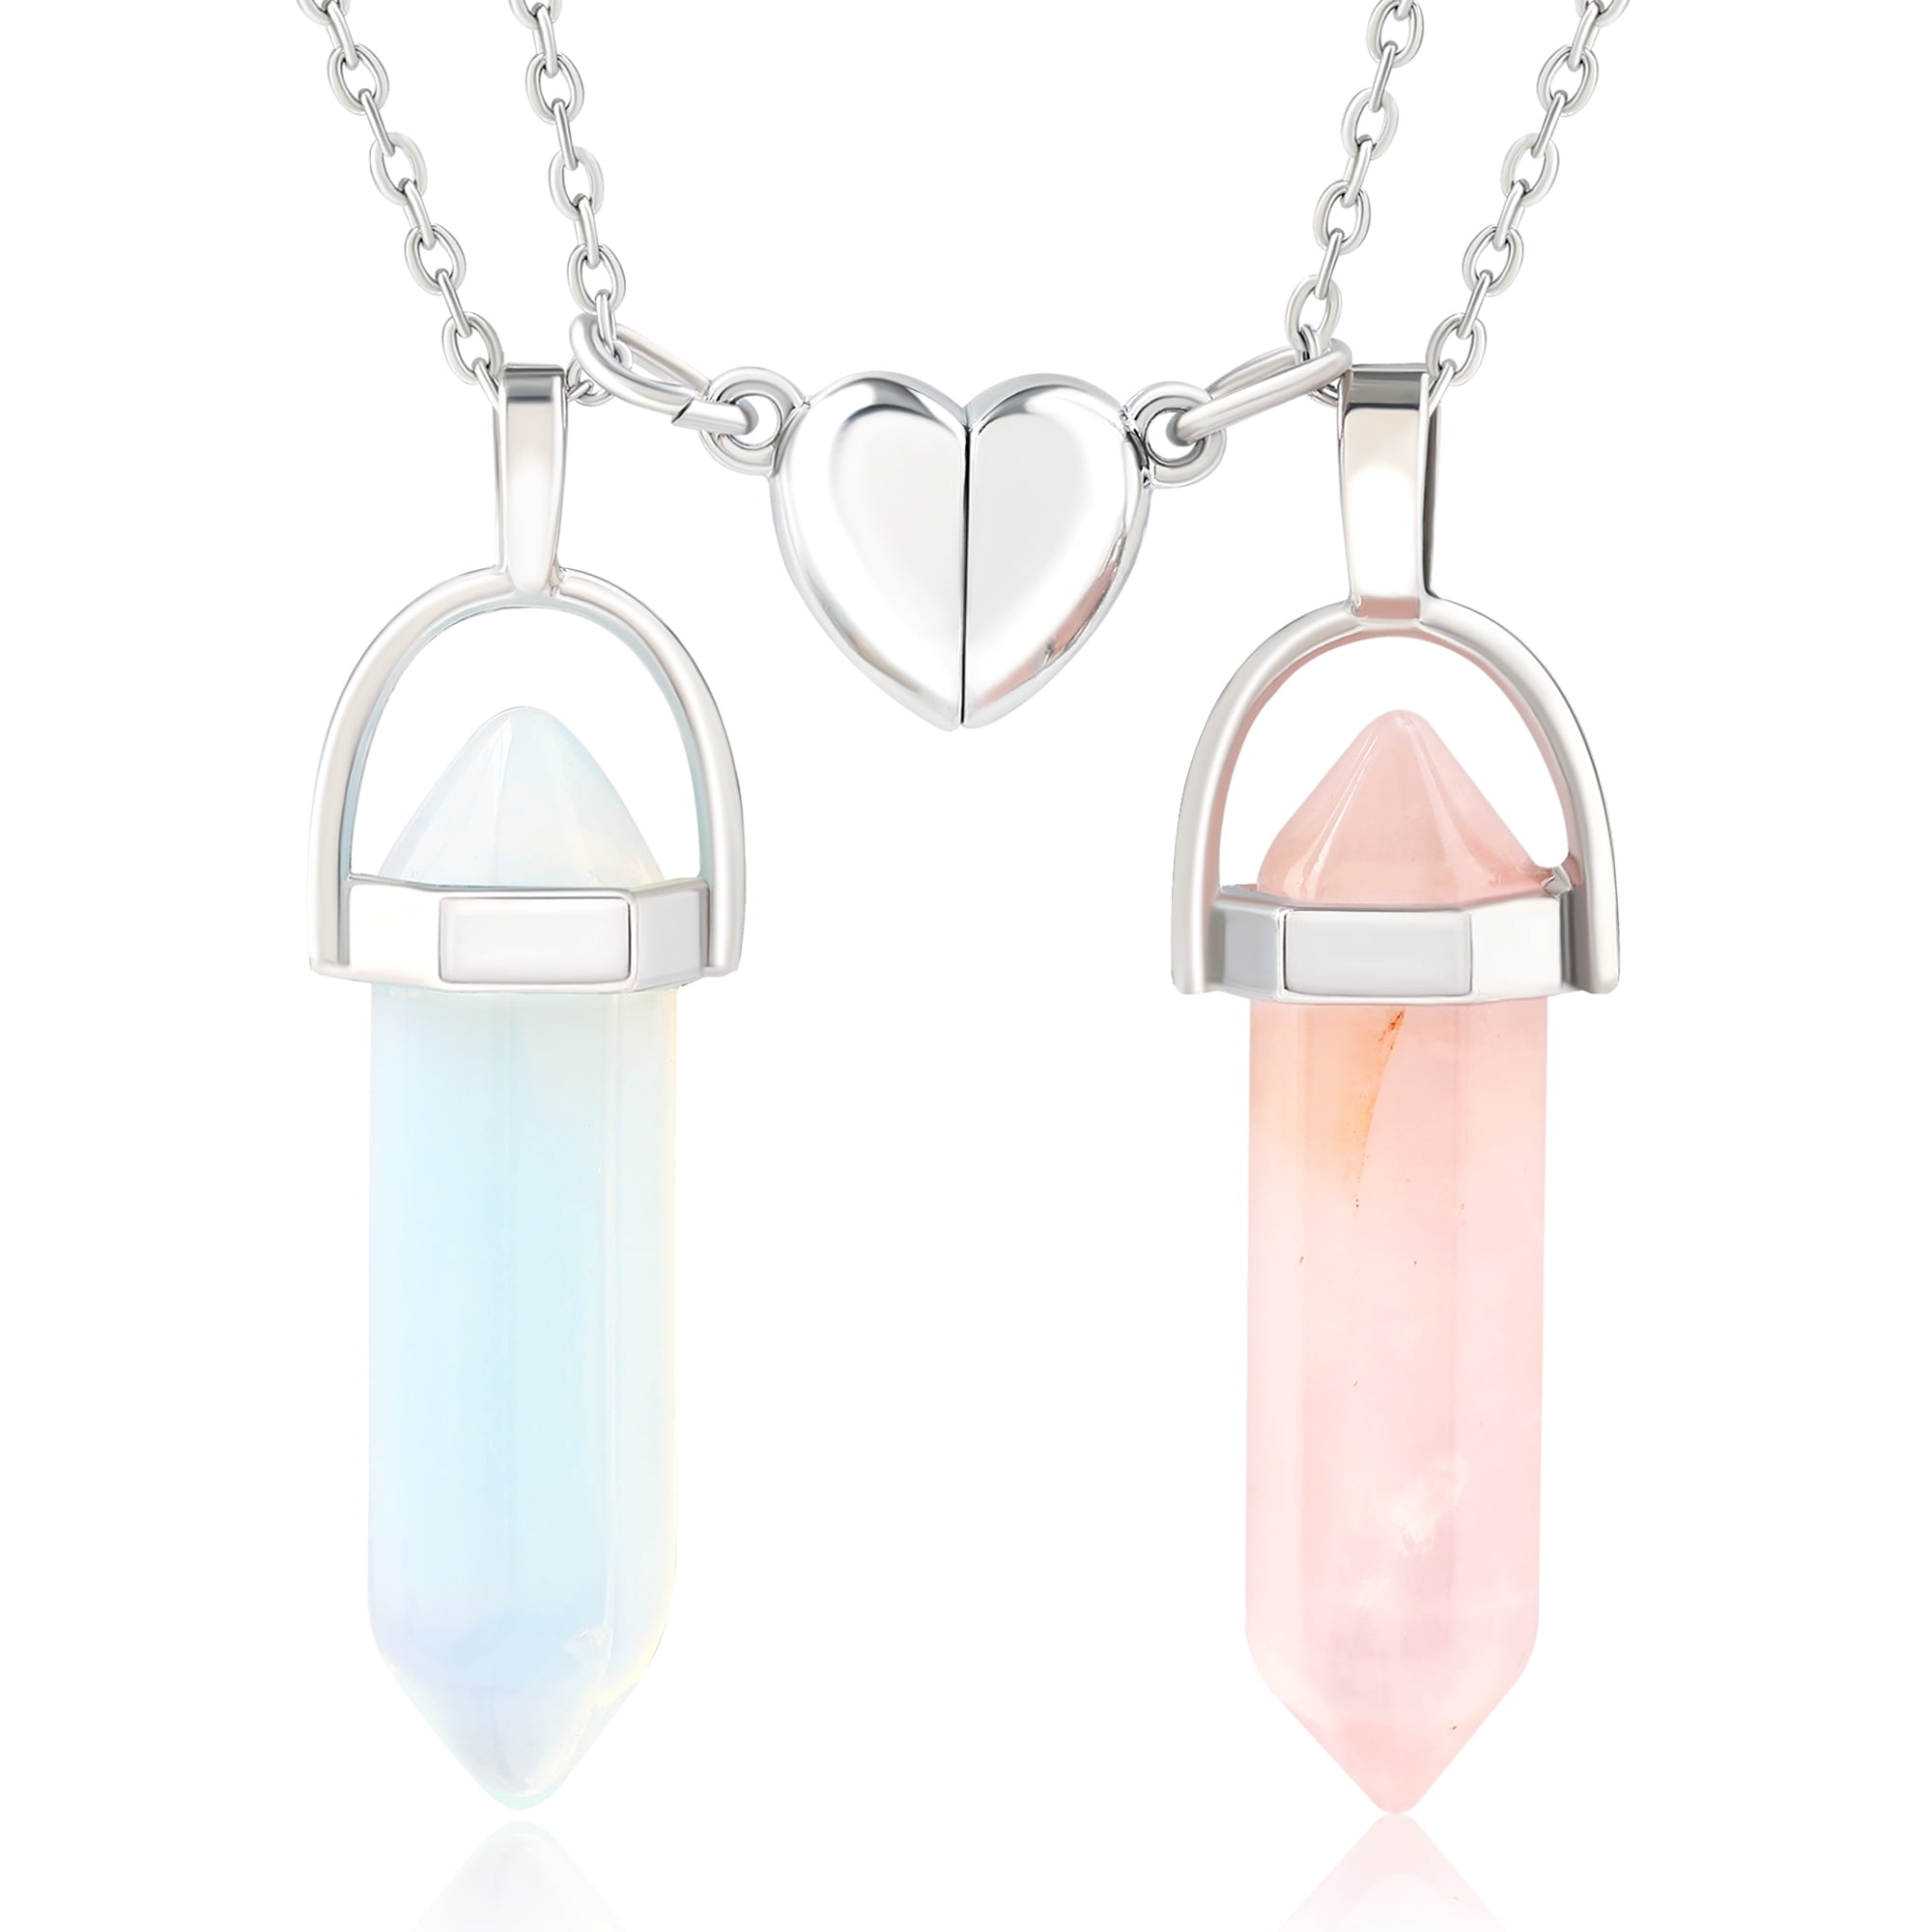  MISS RIGHT Crystal Friendship Matching Couples Necklaces for  Women Men with Magnetic Heart Charm, Dainty Rose Quartz Best Friends BFF  Necklace for 2 Girls (White Opal & Amethyst) : miss right